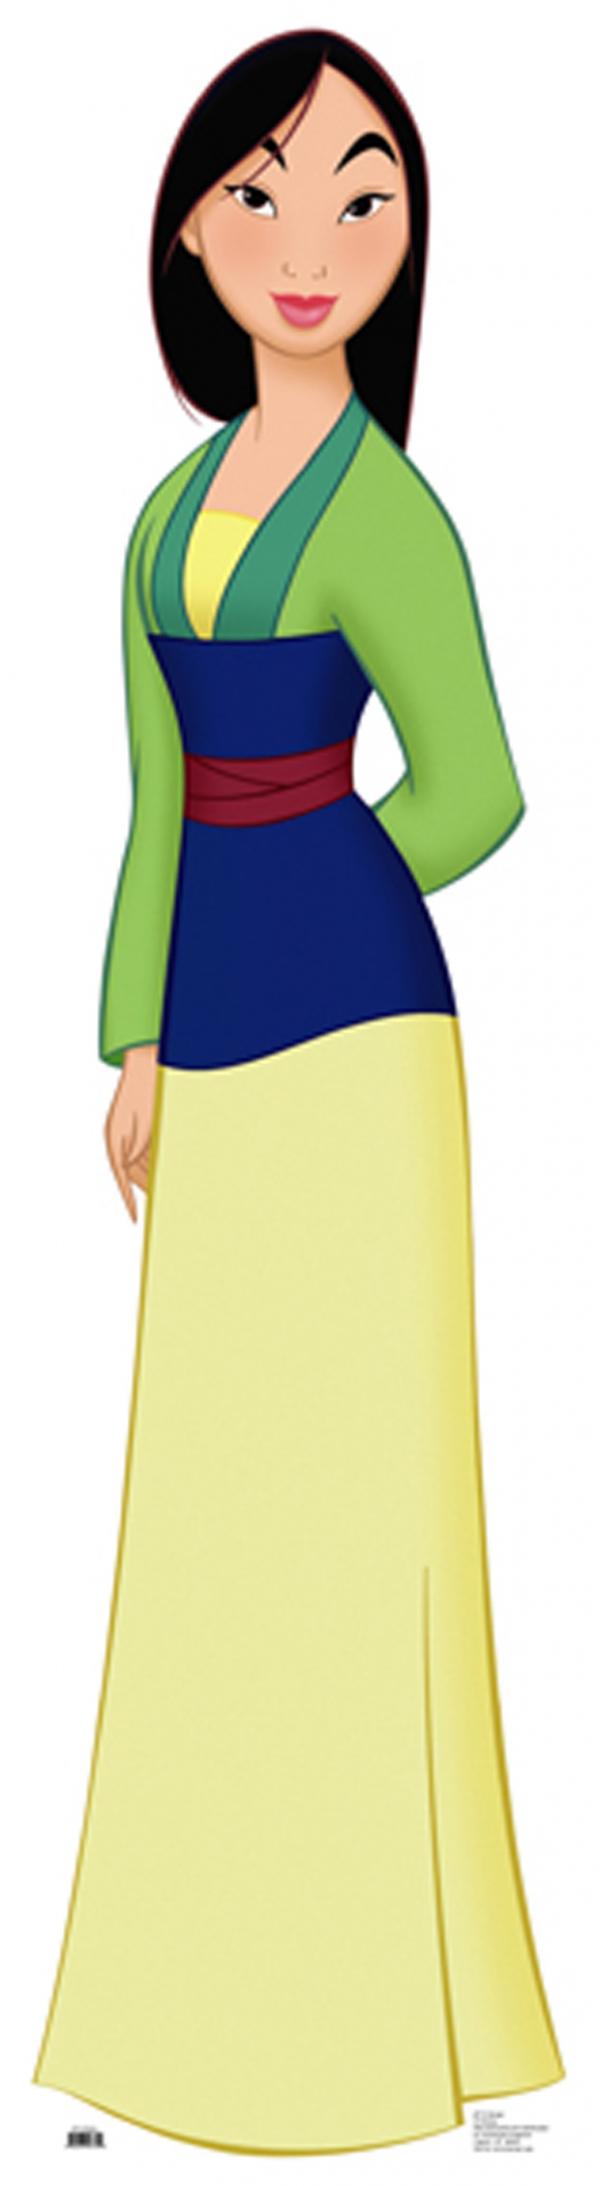 preview Mulan clipart